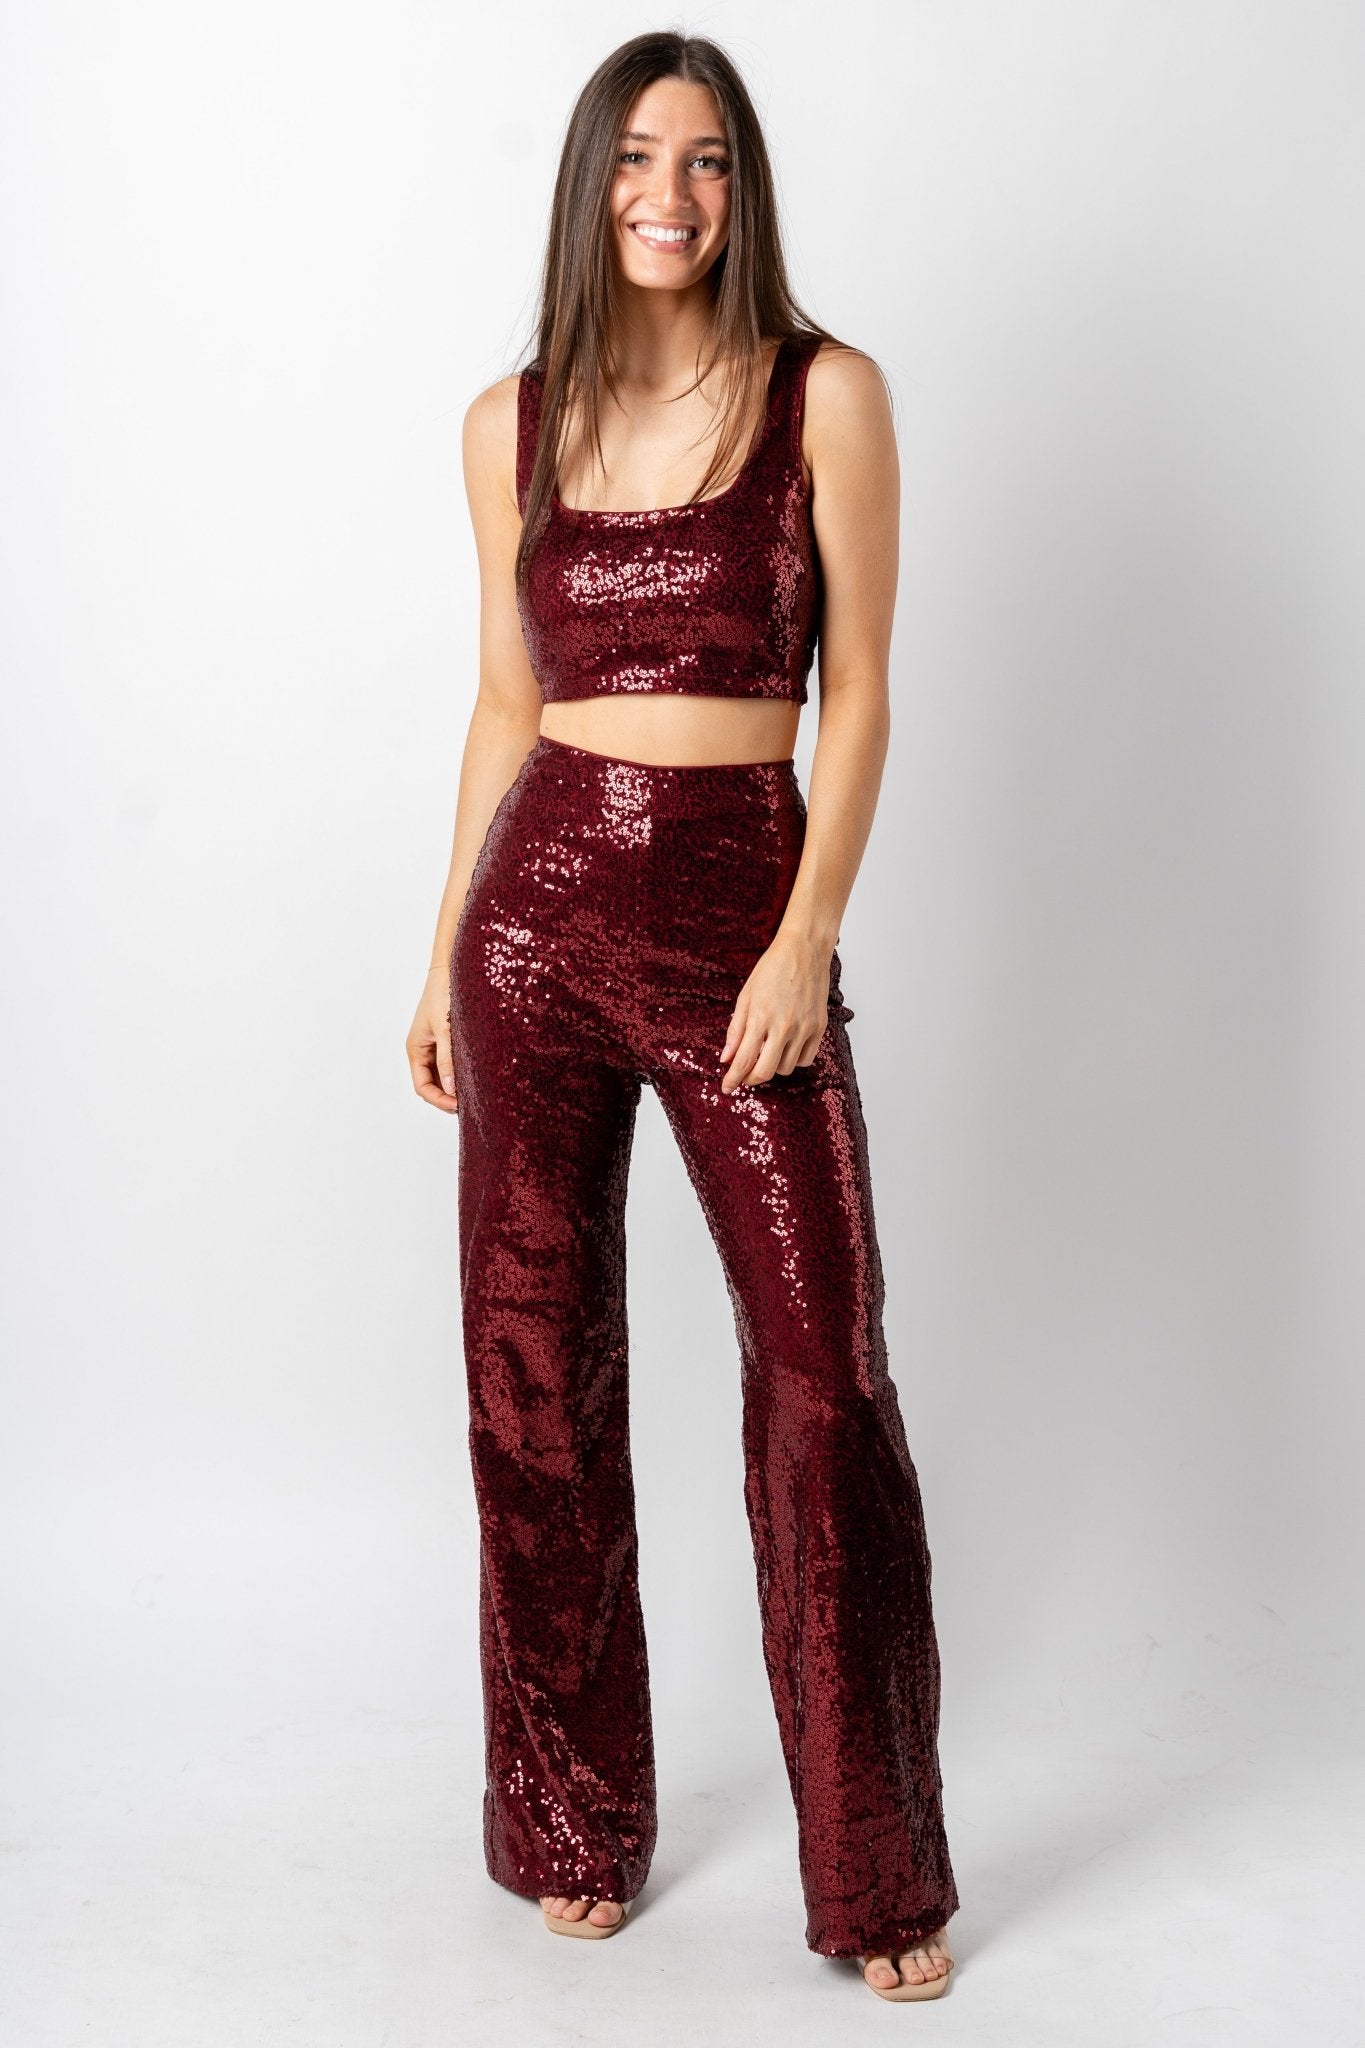 Sequin crop top shiny wine - Exclusive Collection of Holiday Inspired T-Shirts and Hoodies at Lush Fashion Lounge Boutique in Oklahoma City